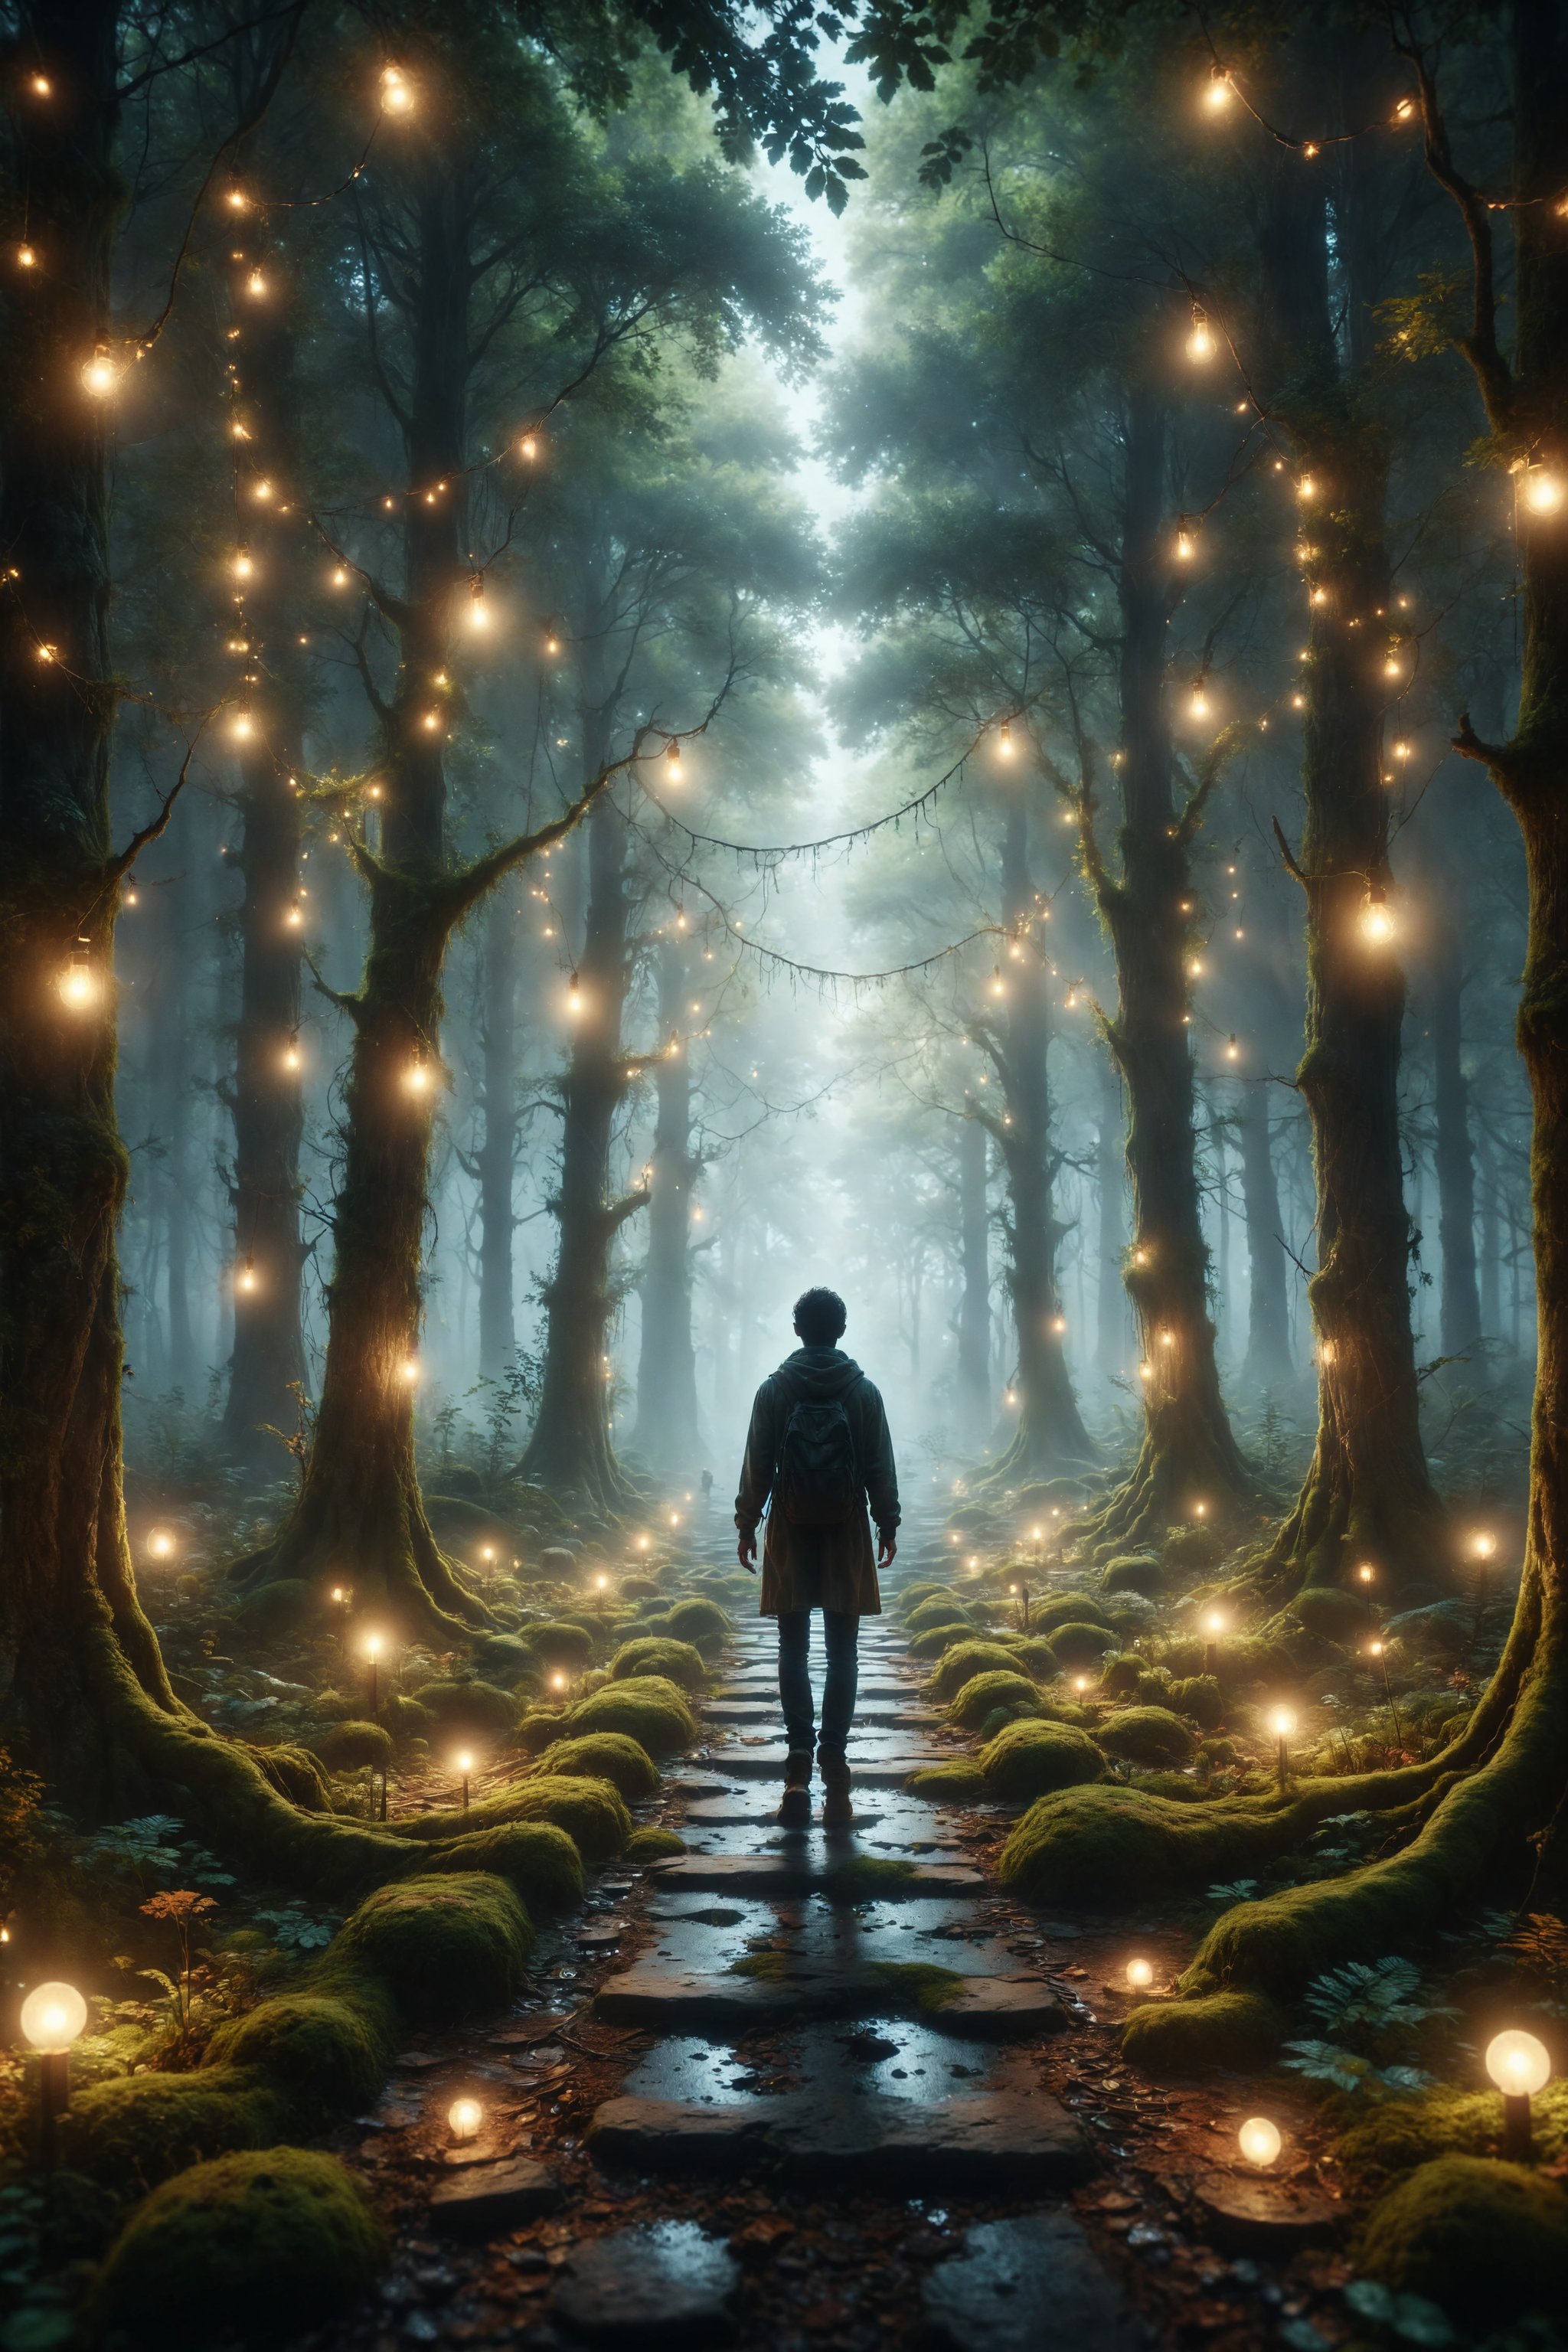 Design a scene of a person walking on a path of floating lights in an enchanted forest.